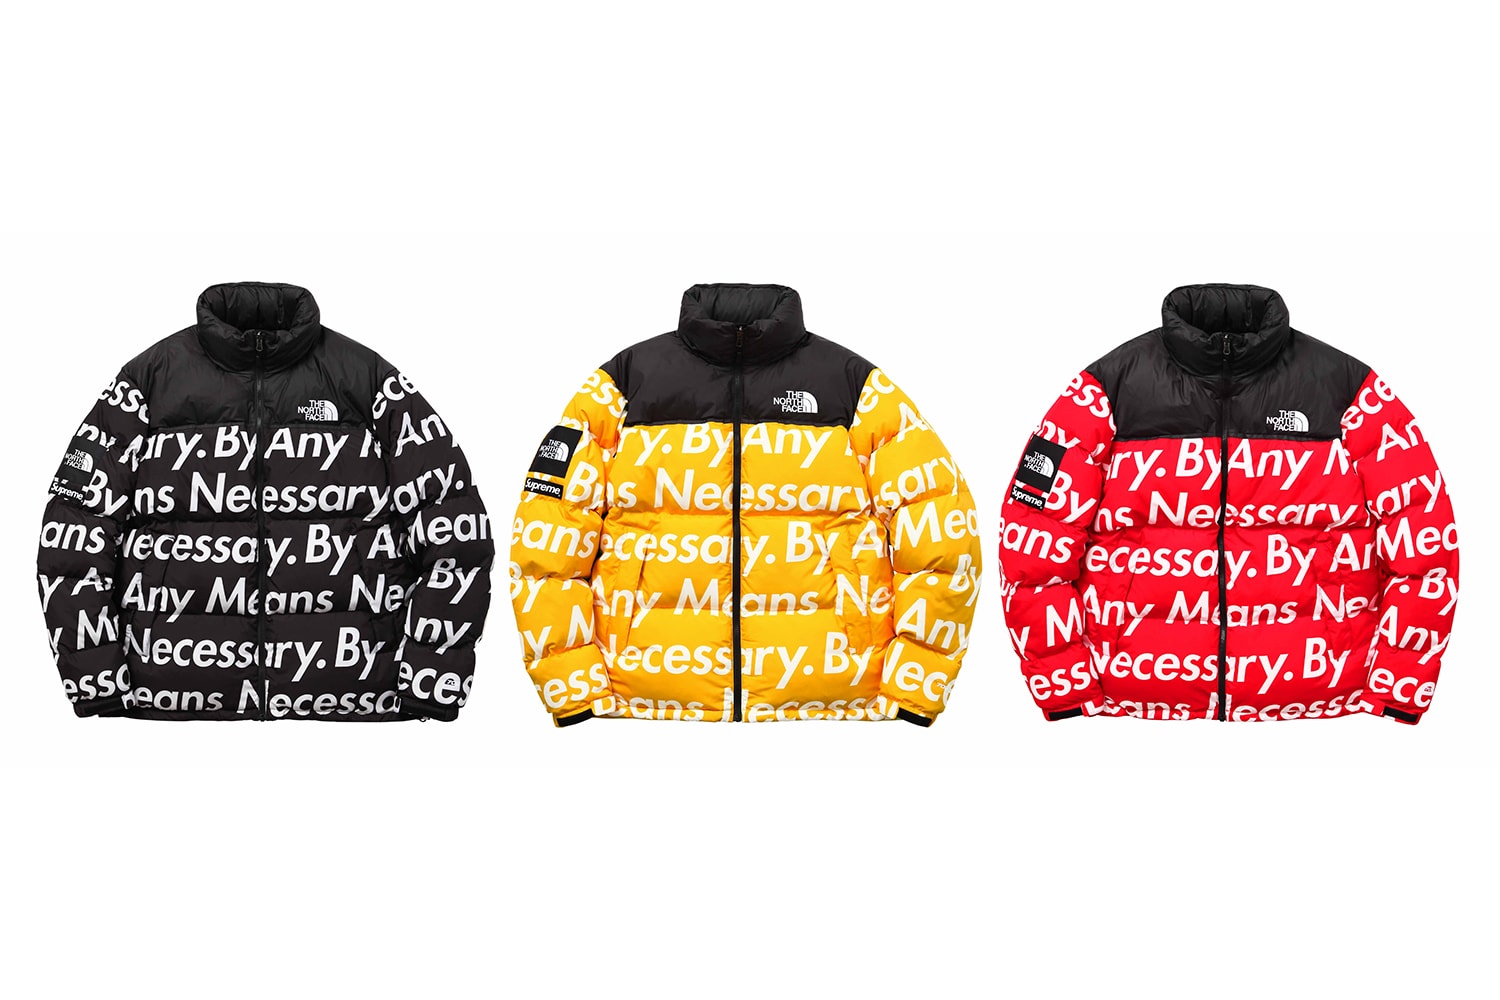 SUPREME x THE NORTH FACE Nuptse Jacket Yellow Leopard - 100% AUTHENTIC